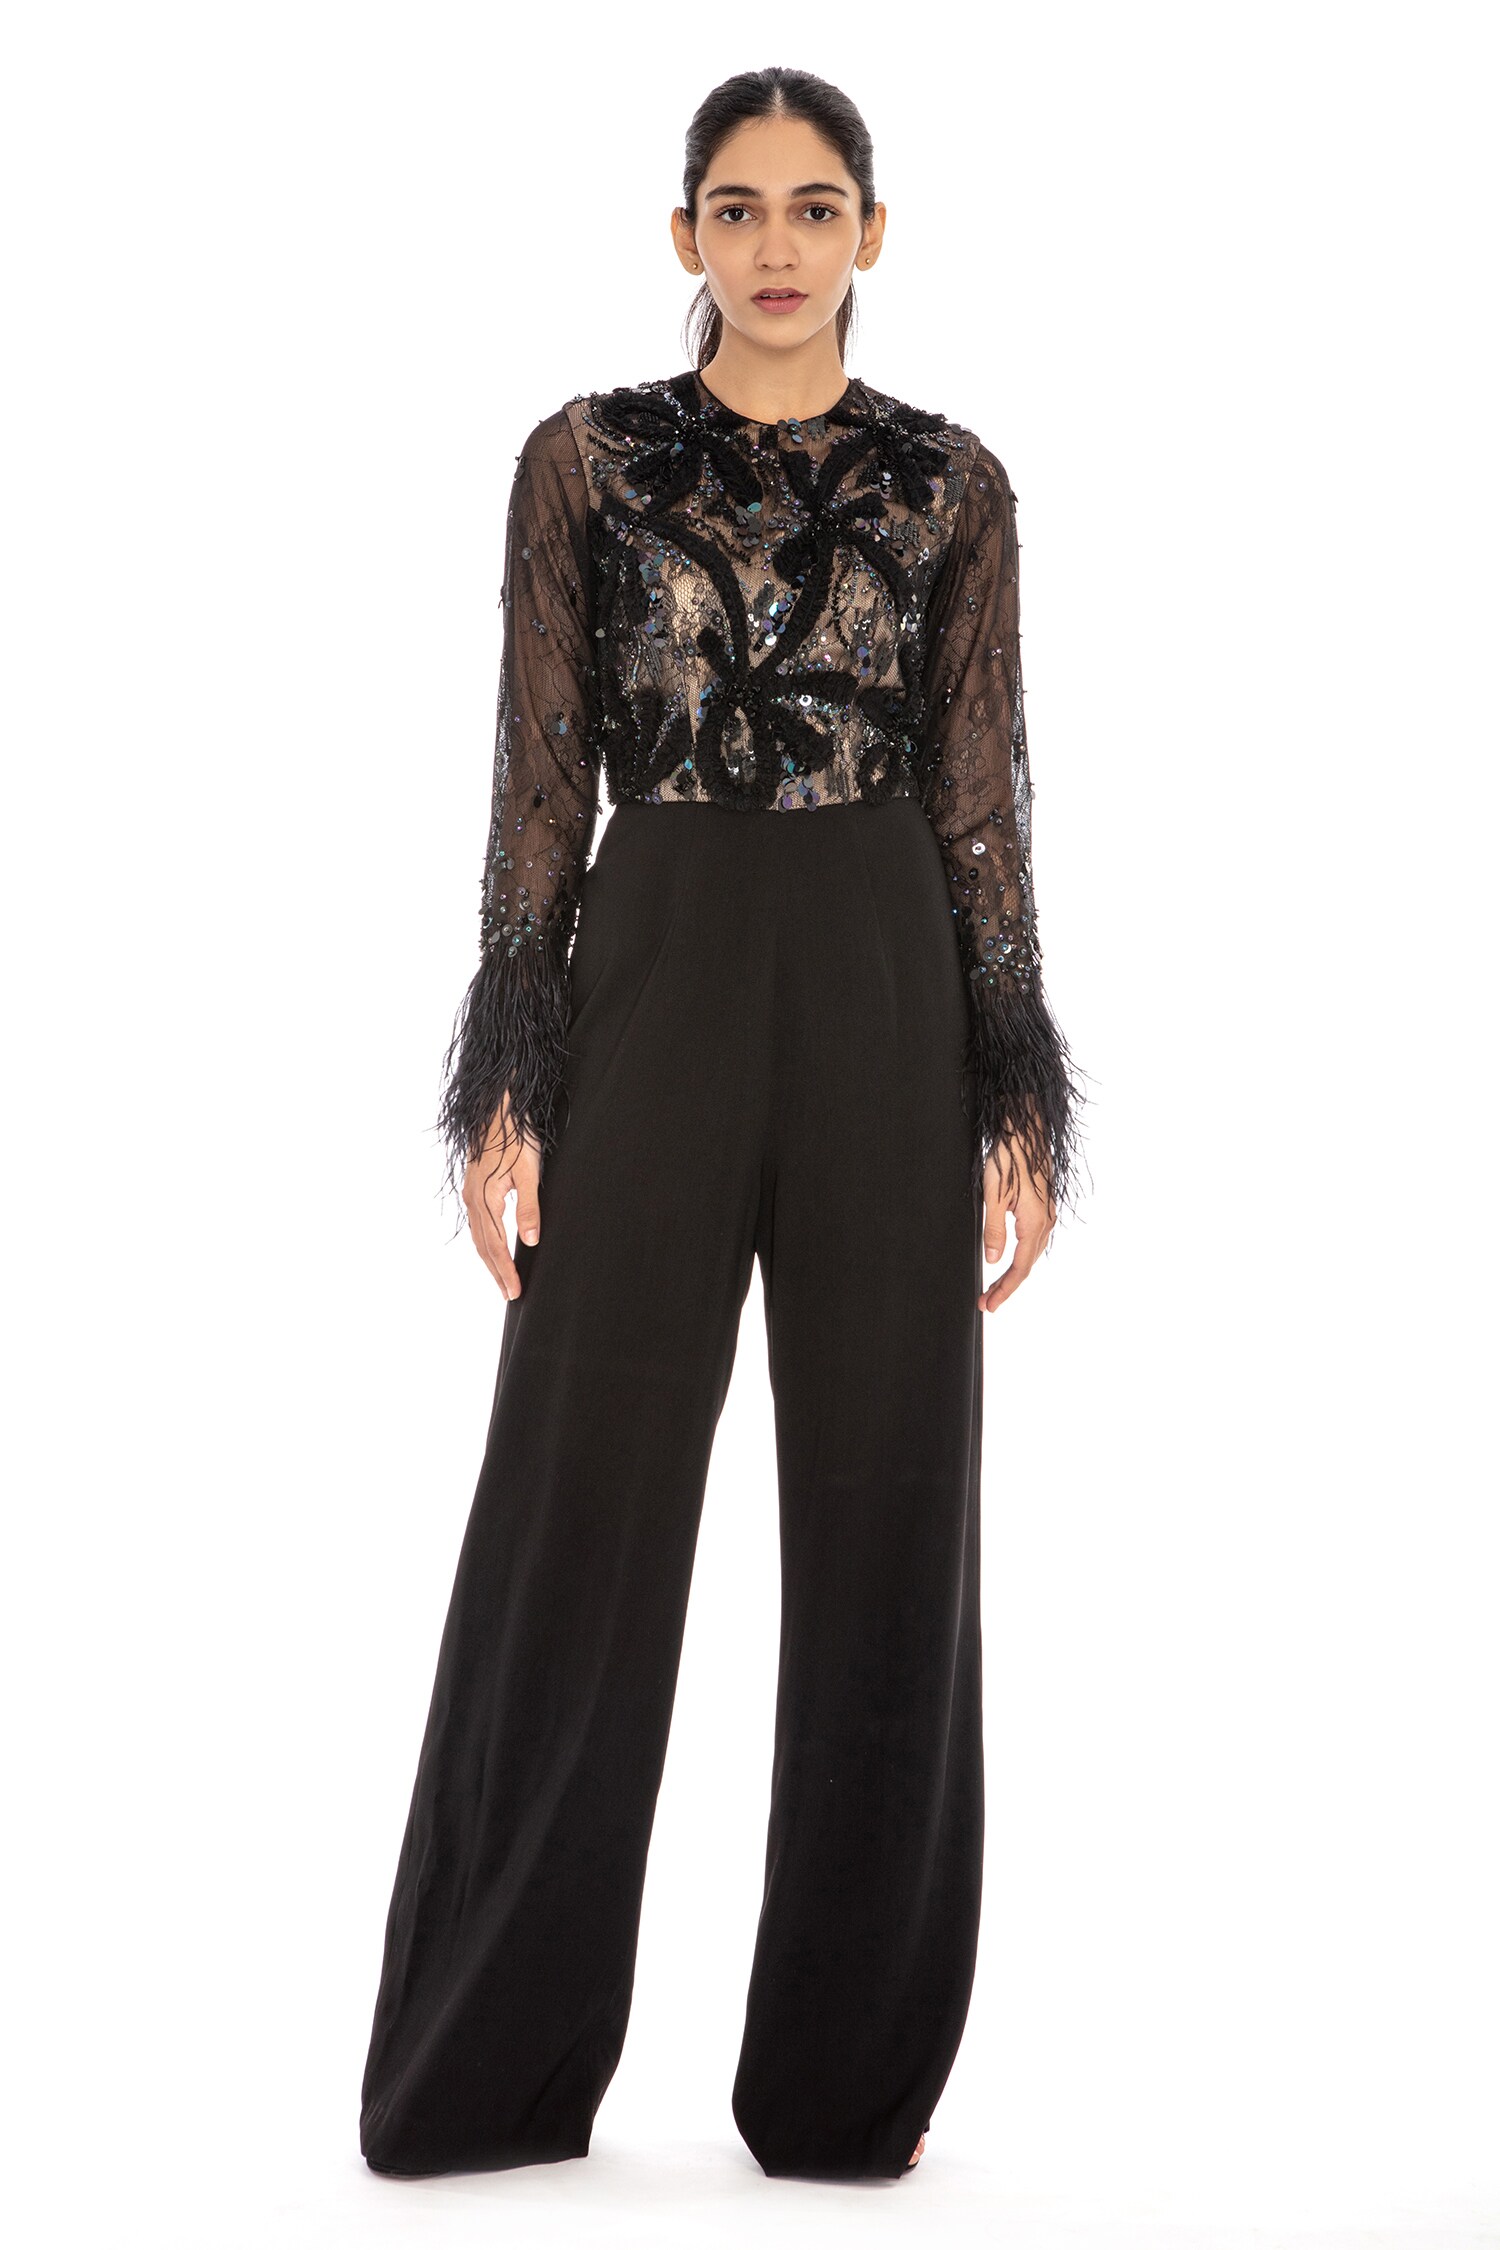 Buy Dilnaz Karbhary Black Lace Embroidered Jumpsuit Online | Aza Fashions